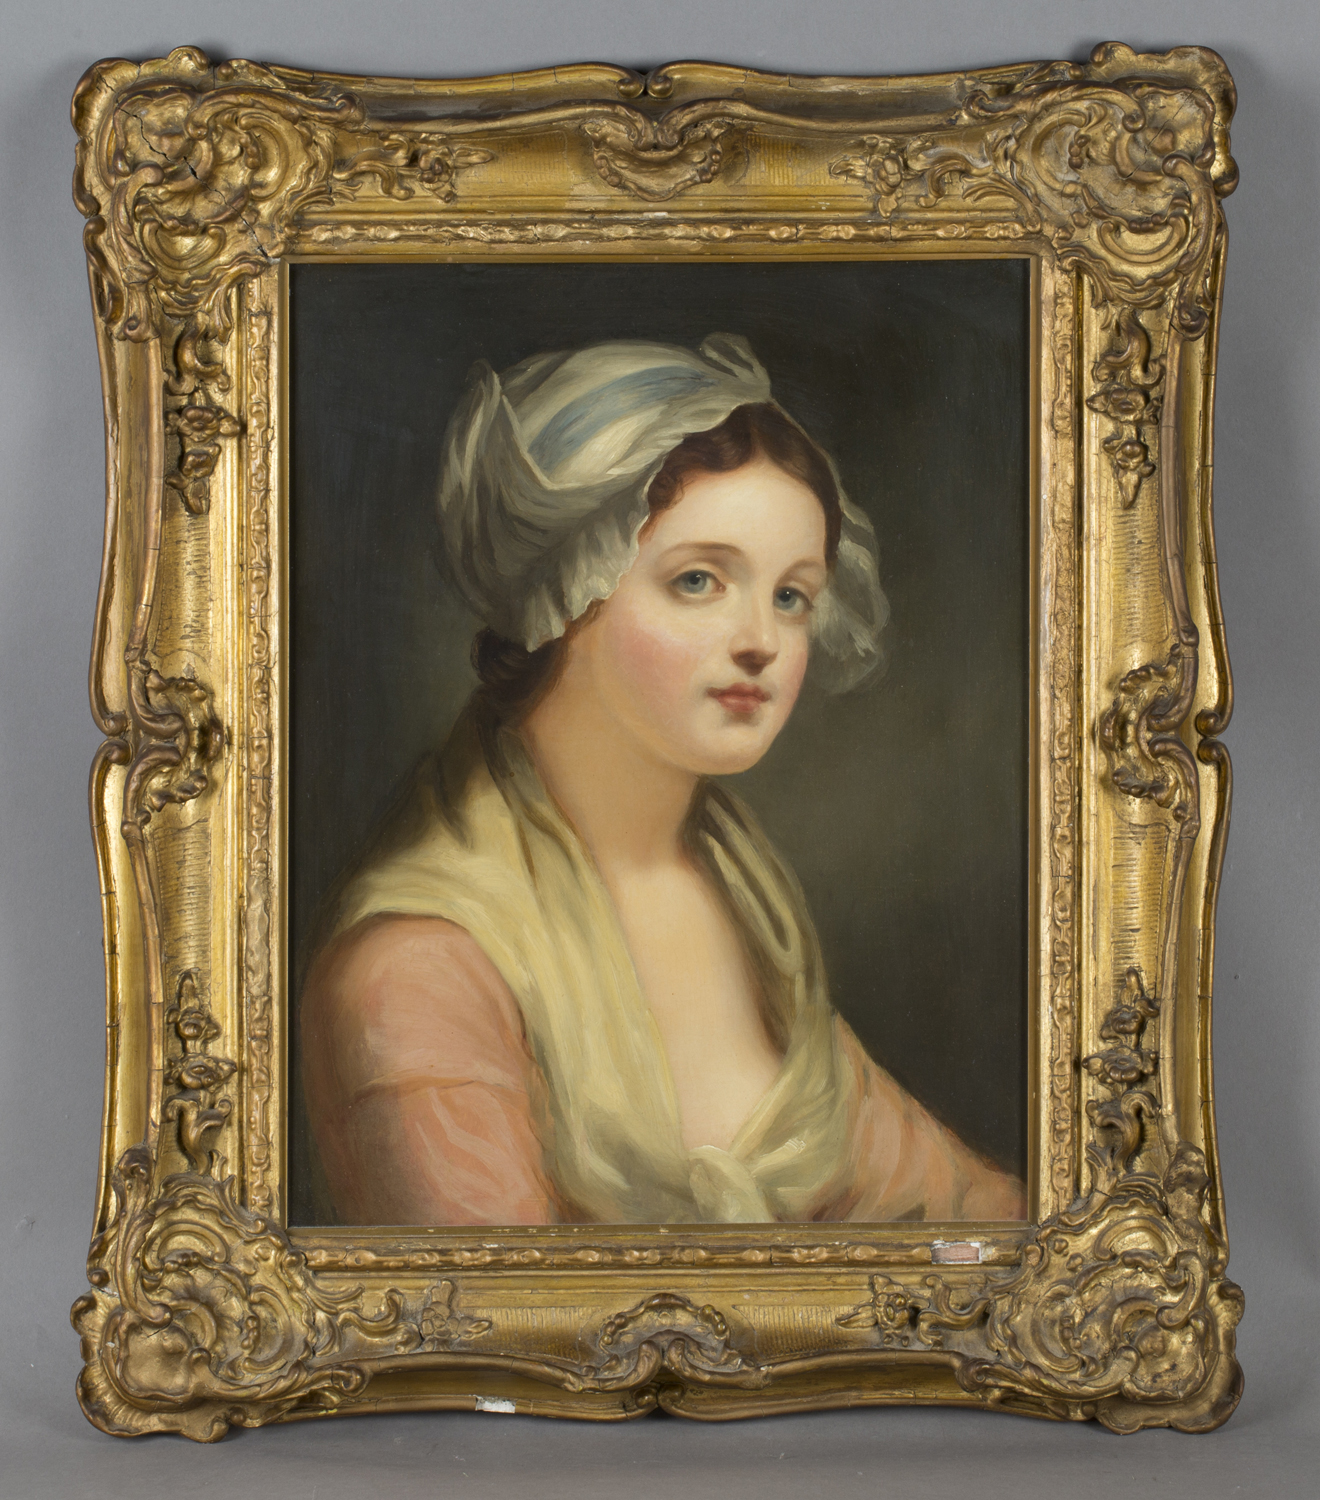 Follower of Jean-Baptiste Greuze - Half Length Portrait of a Girl wearing a Pink Dress and White